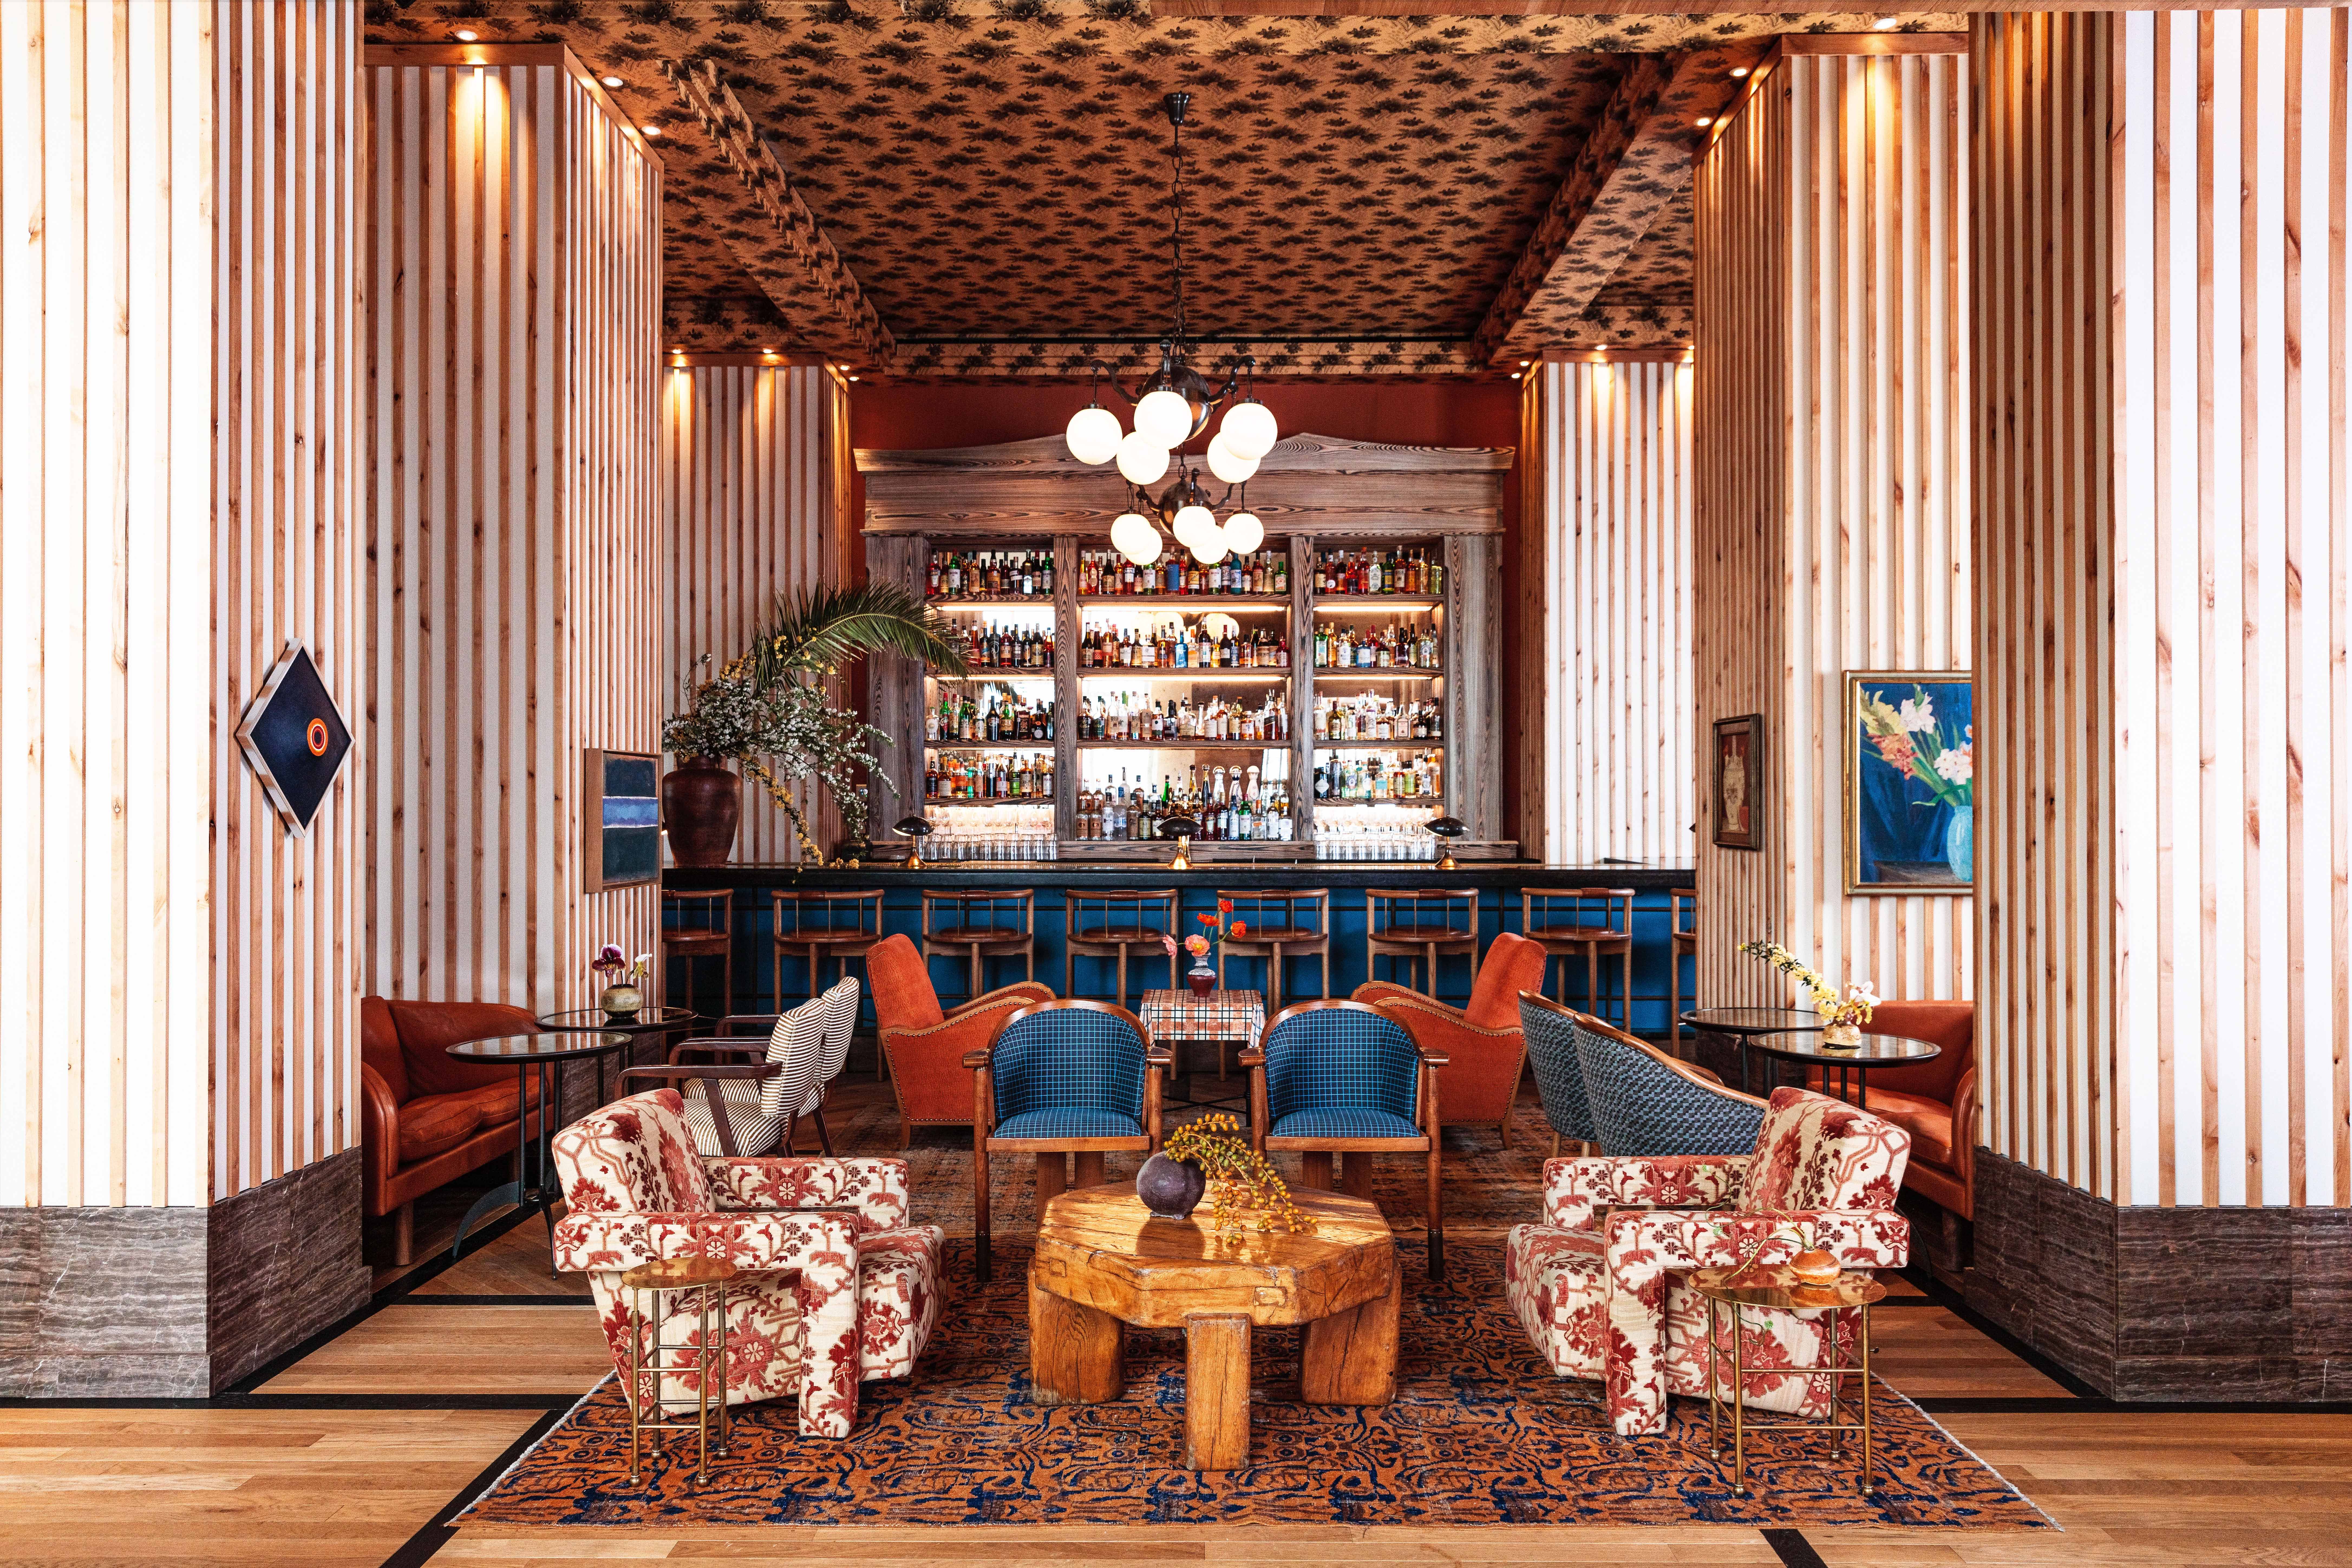 Lobby of a hotel with various patterned chairs and a bar in the back.